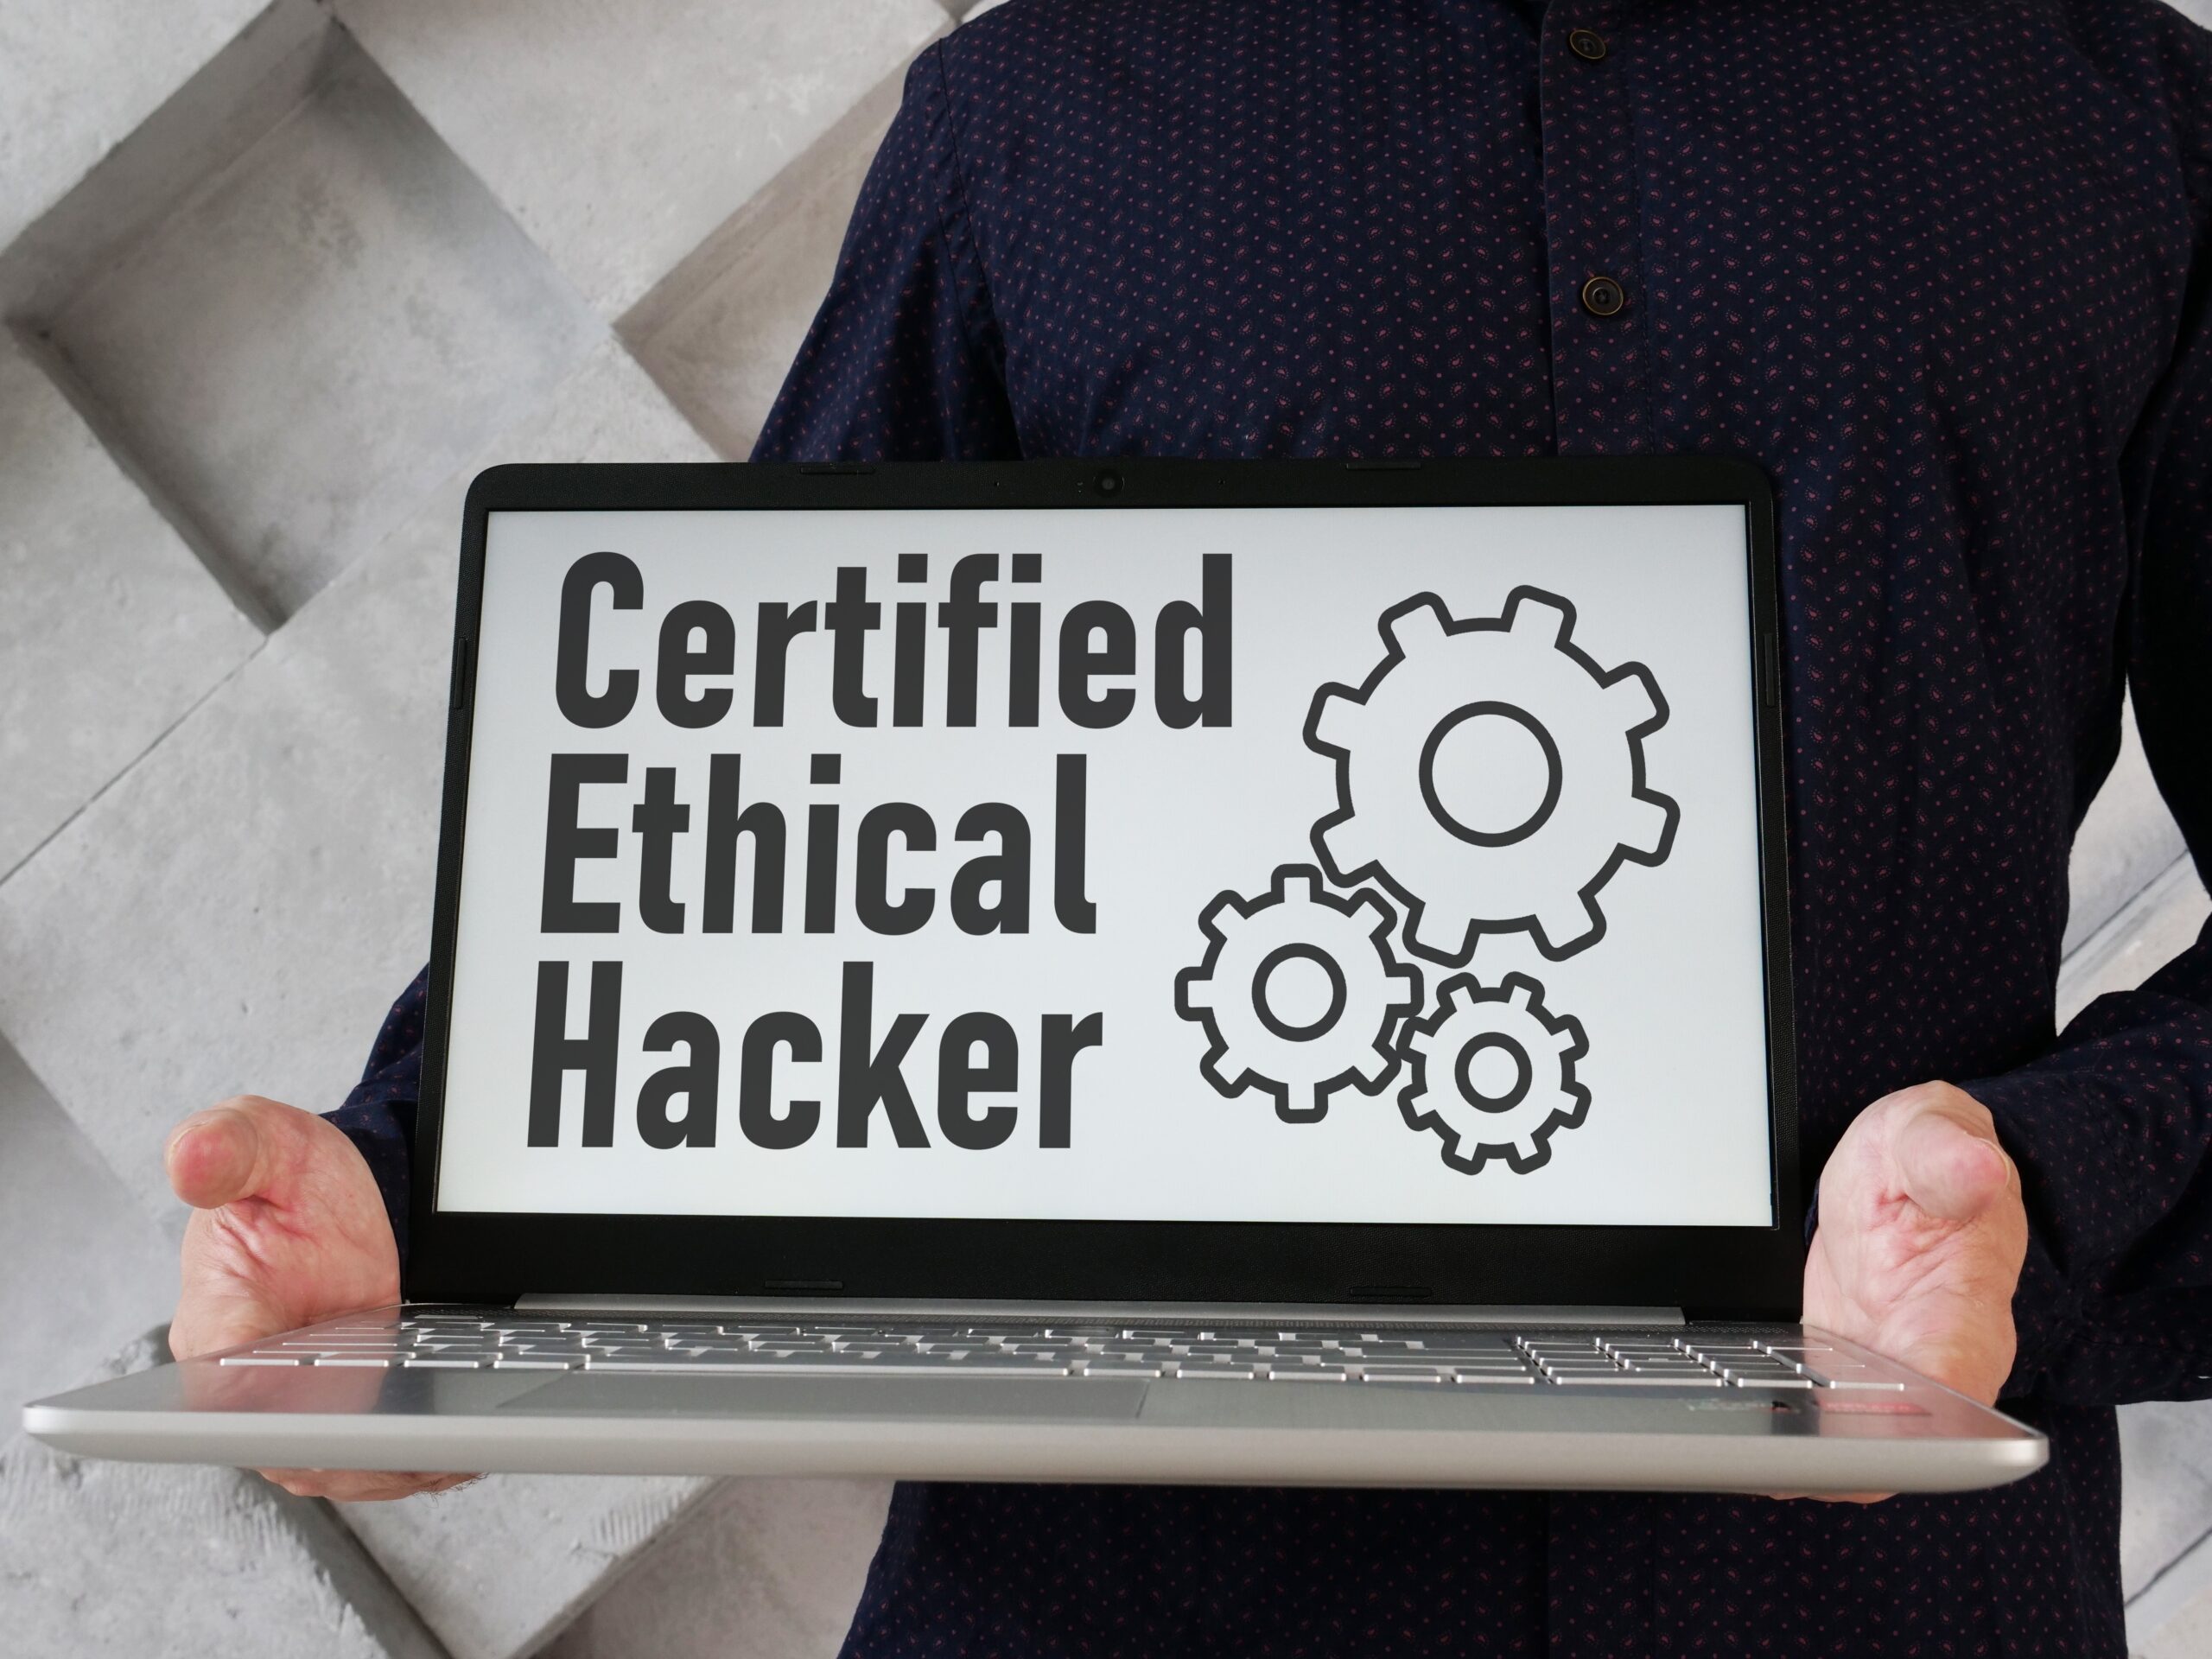 Ethical hacking and cyber security